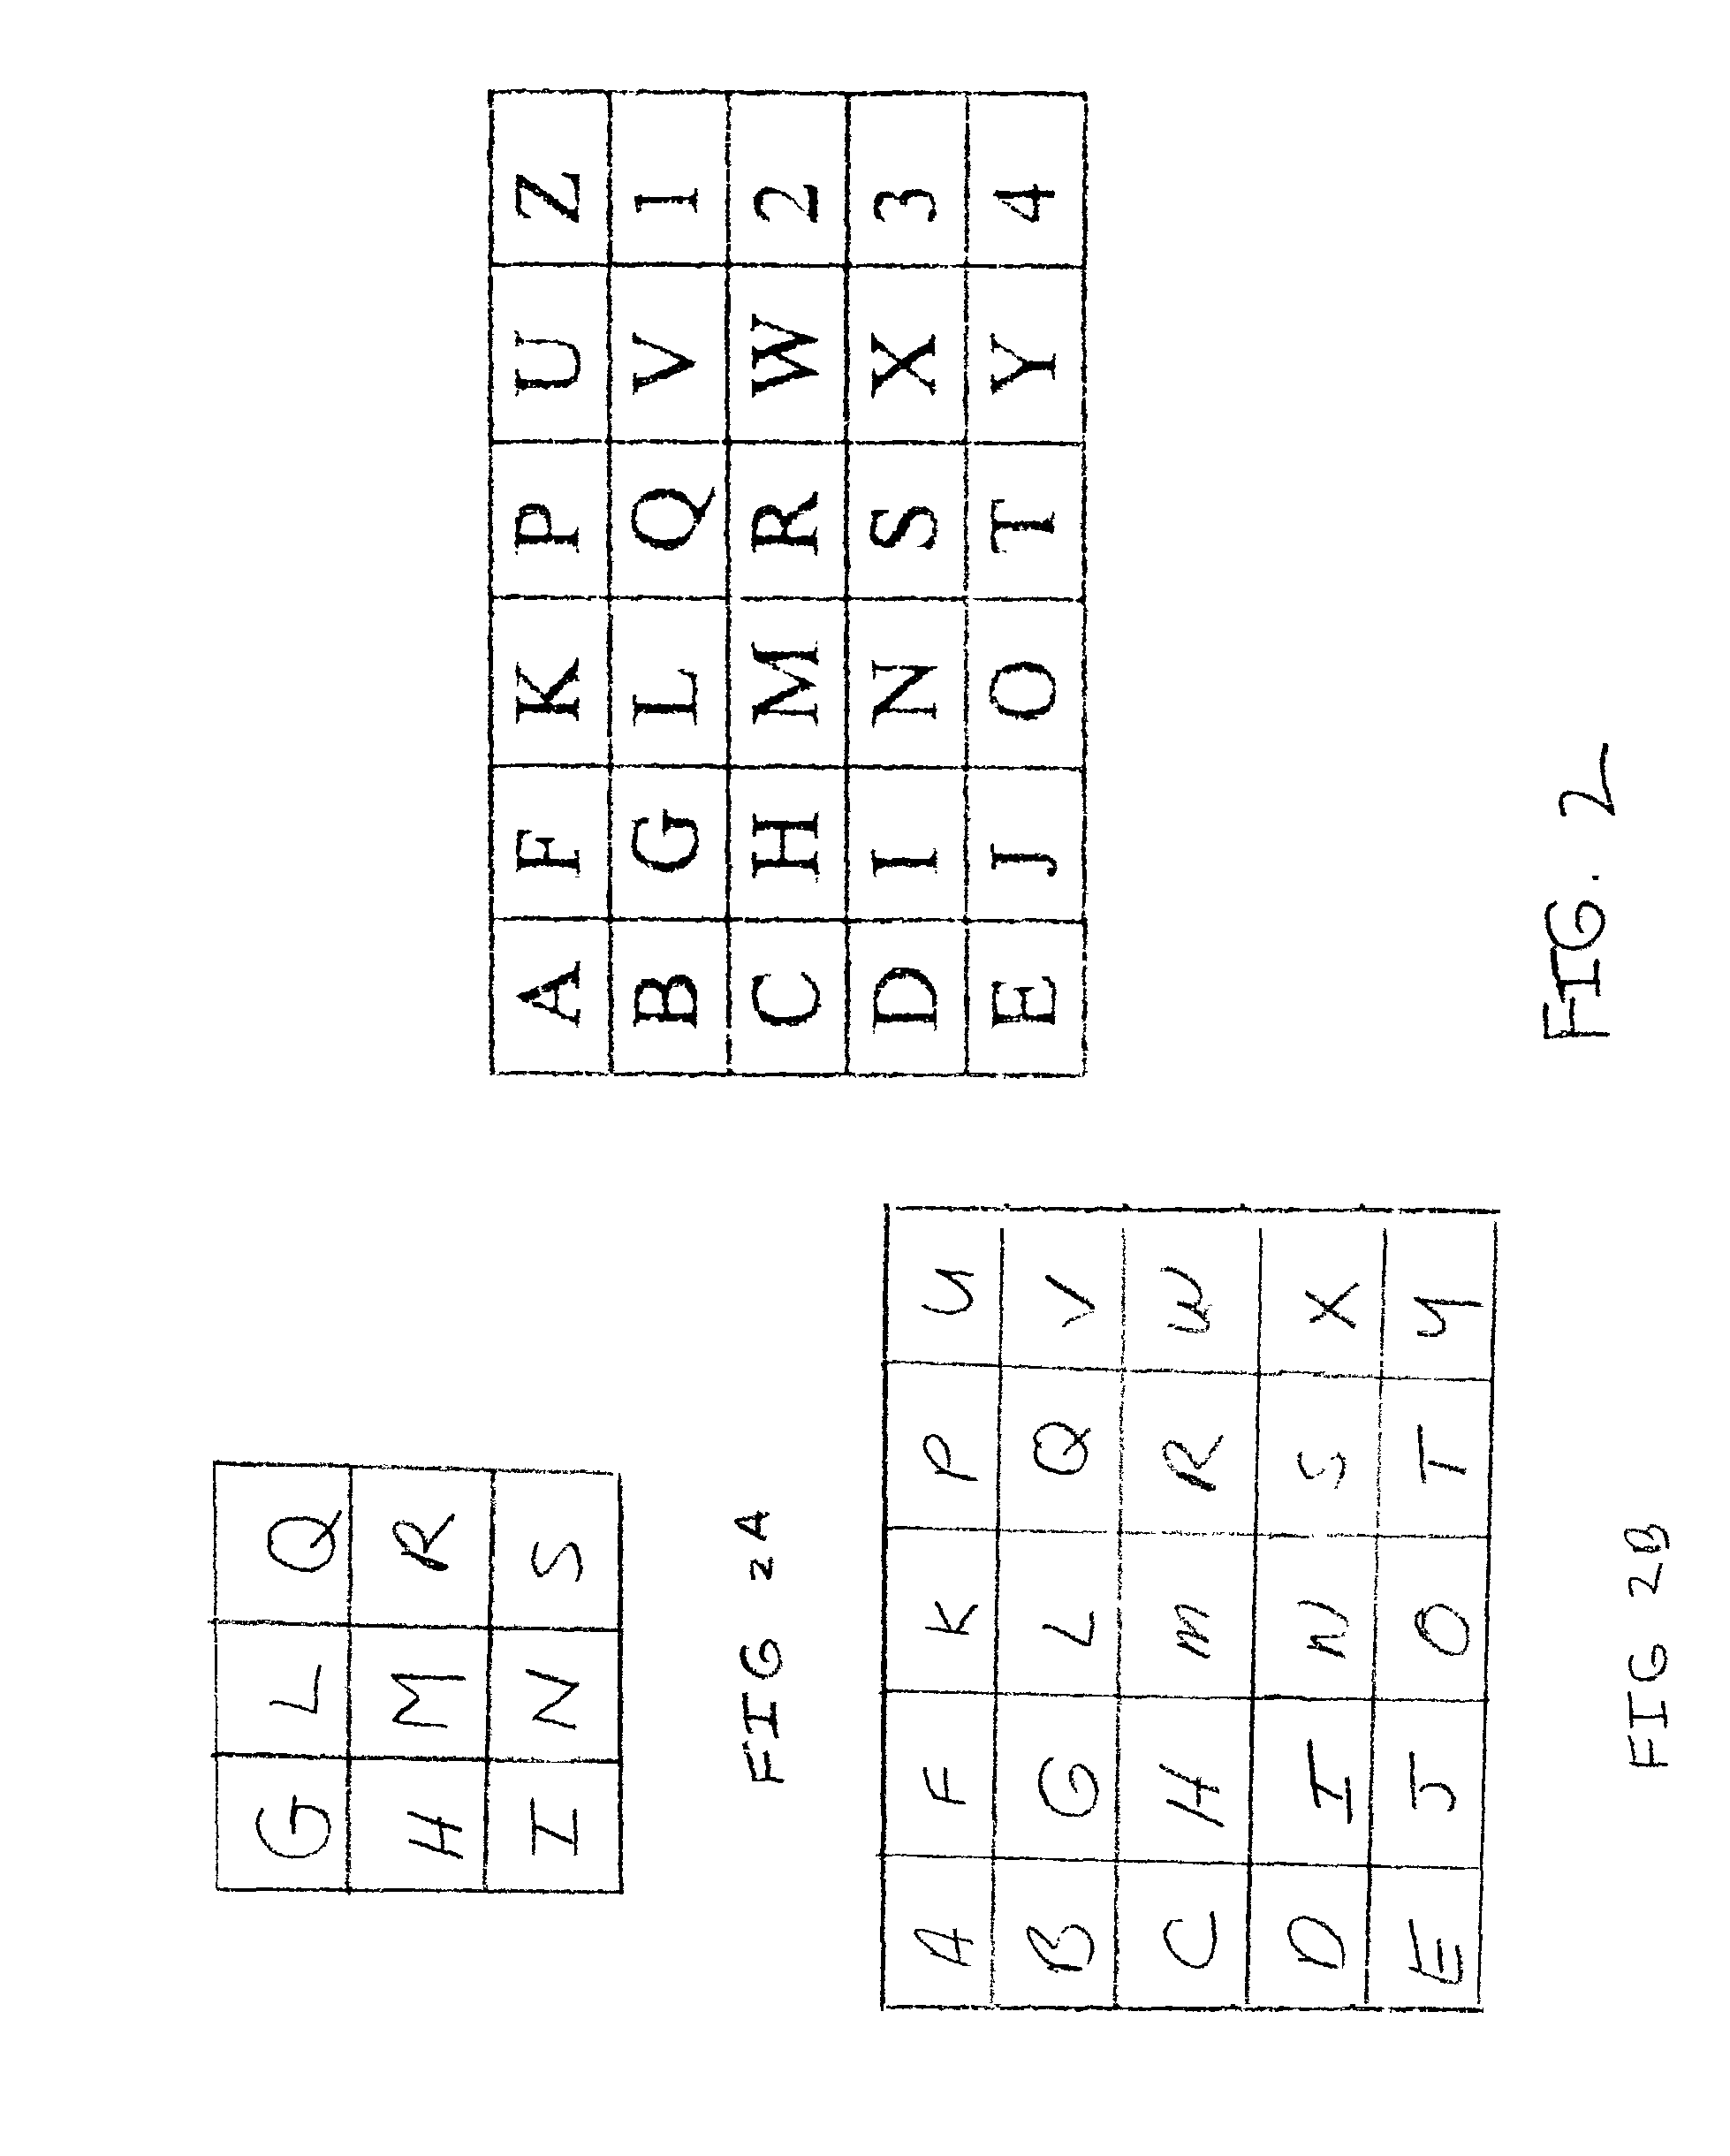 Method and system for using an image based autofocus algorithm